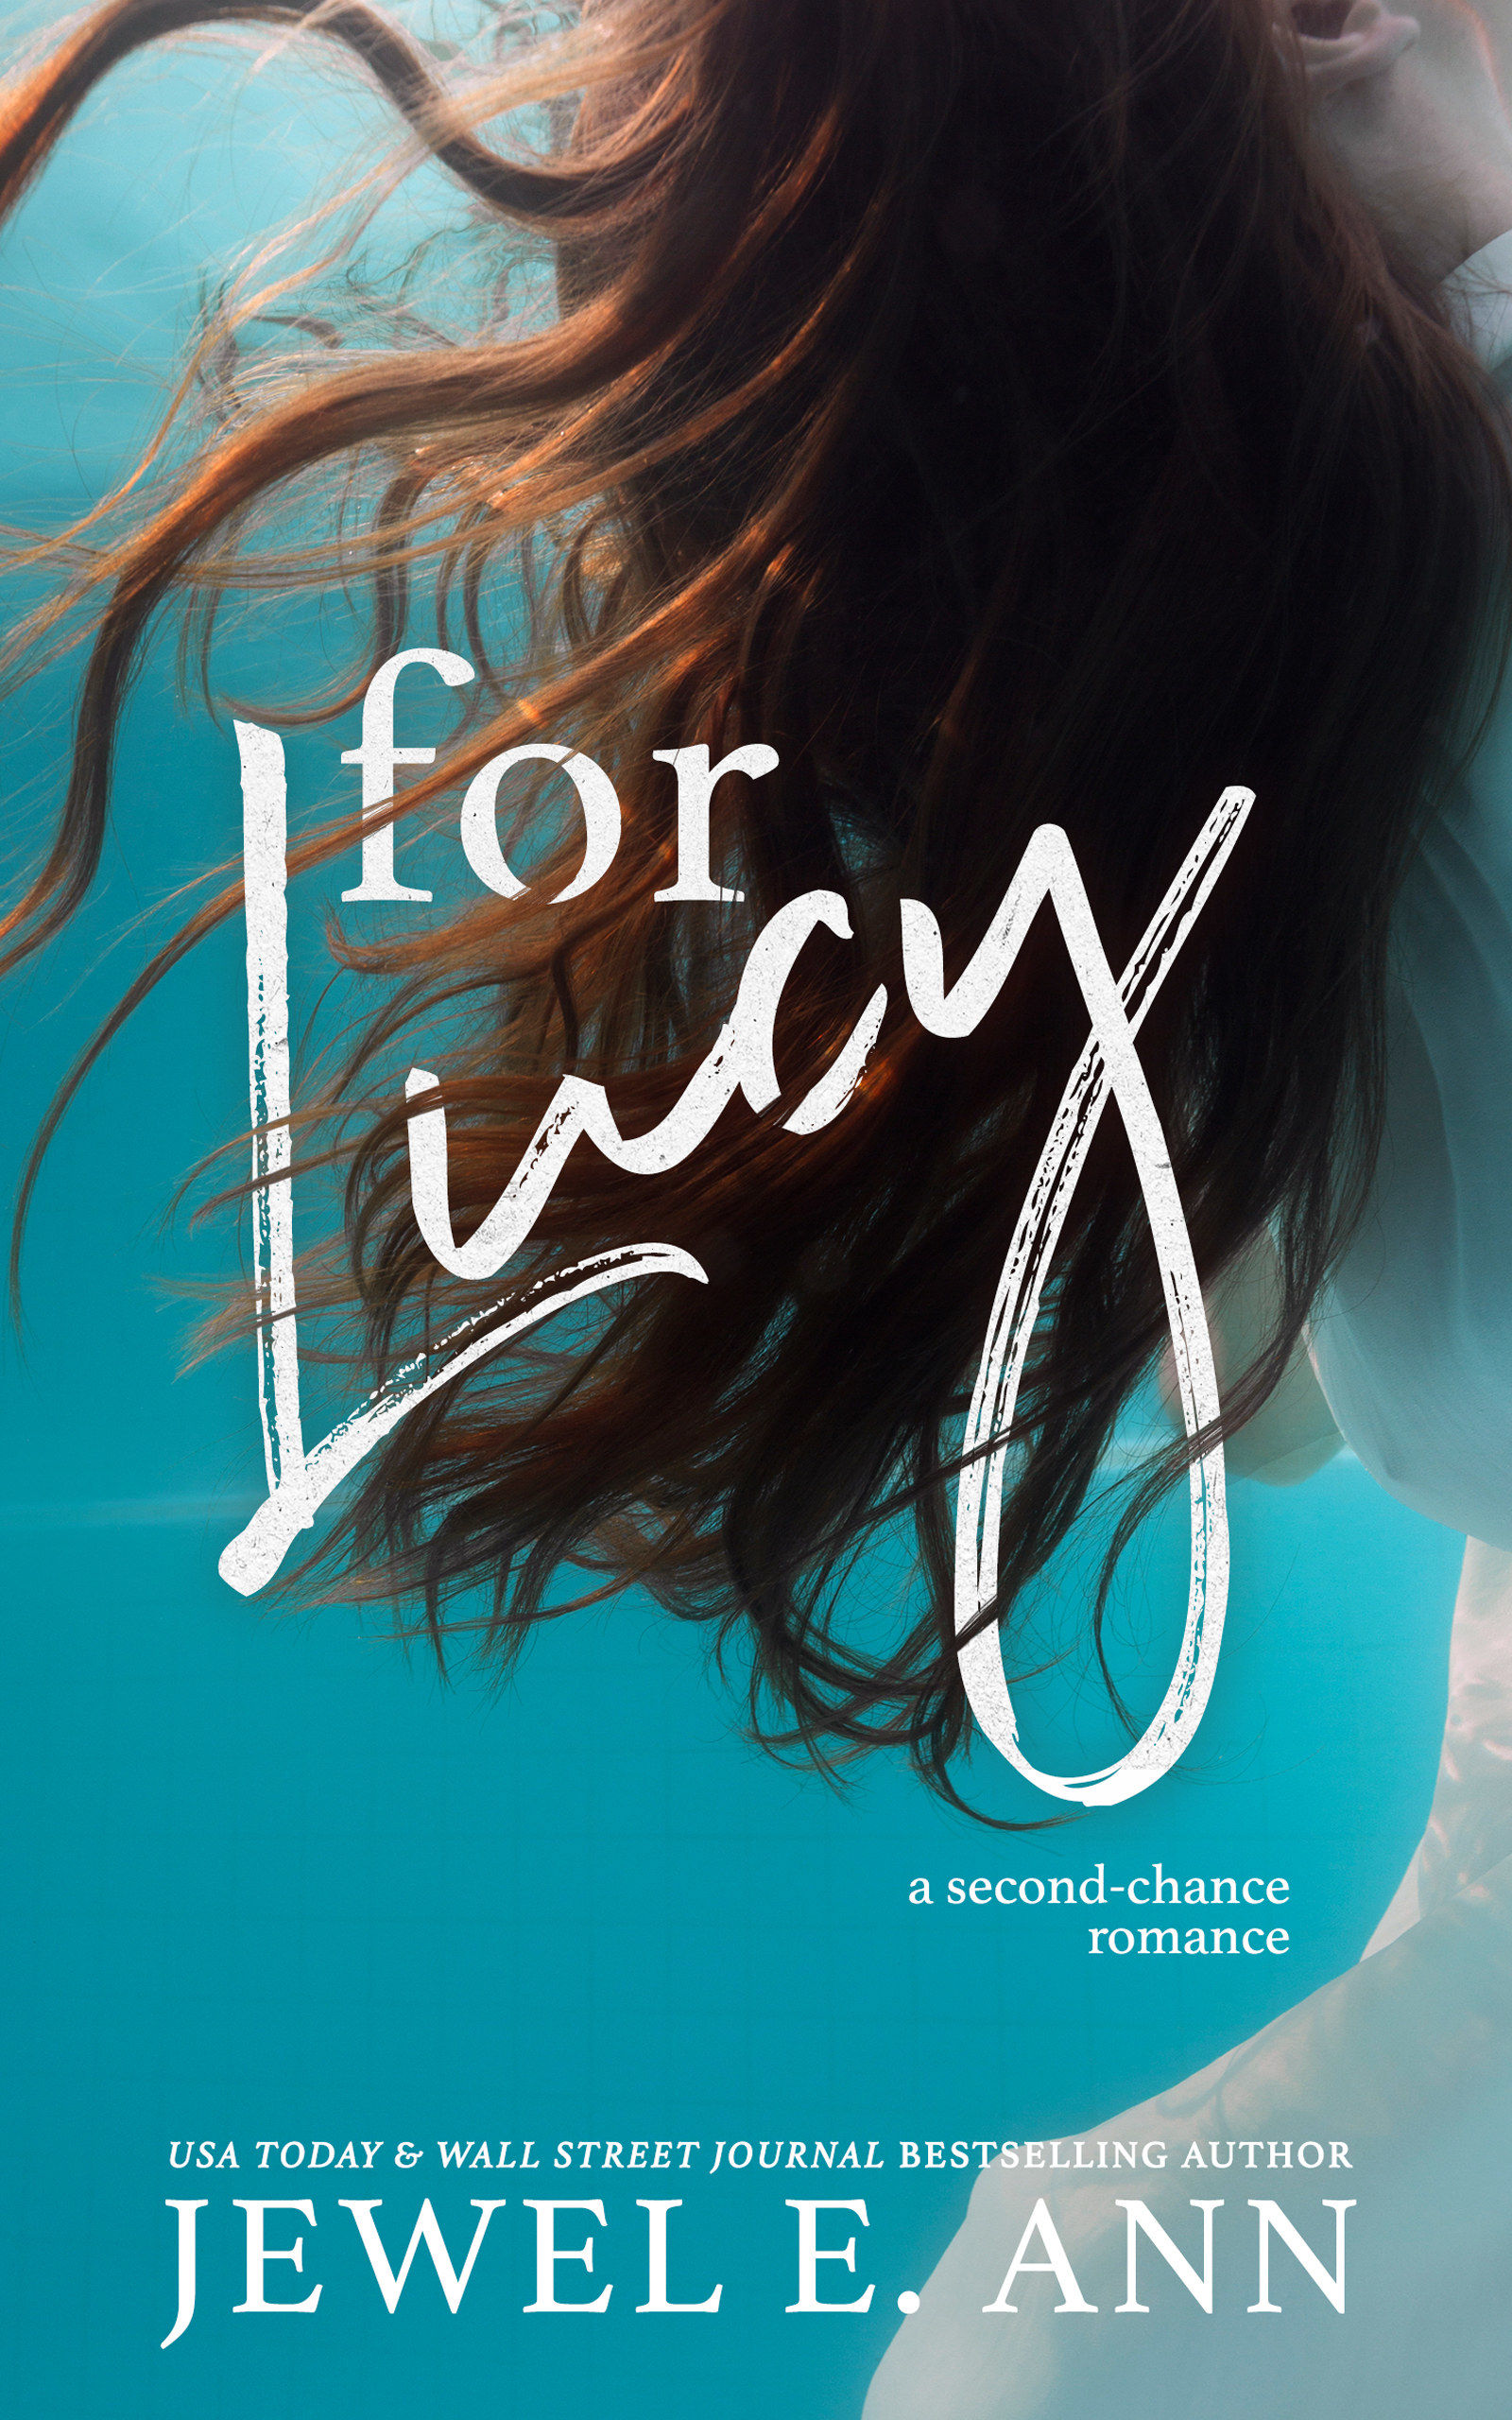 For Lucy cover by Jewel E. Ann